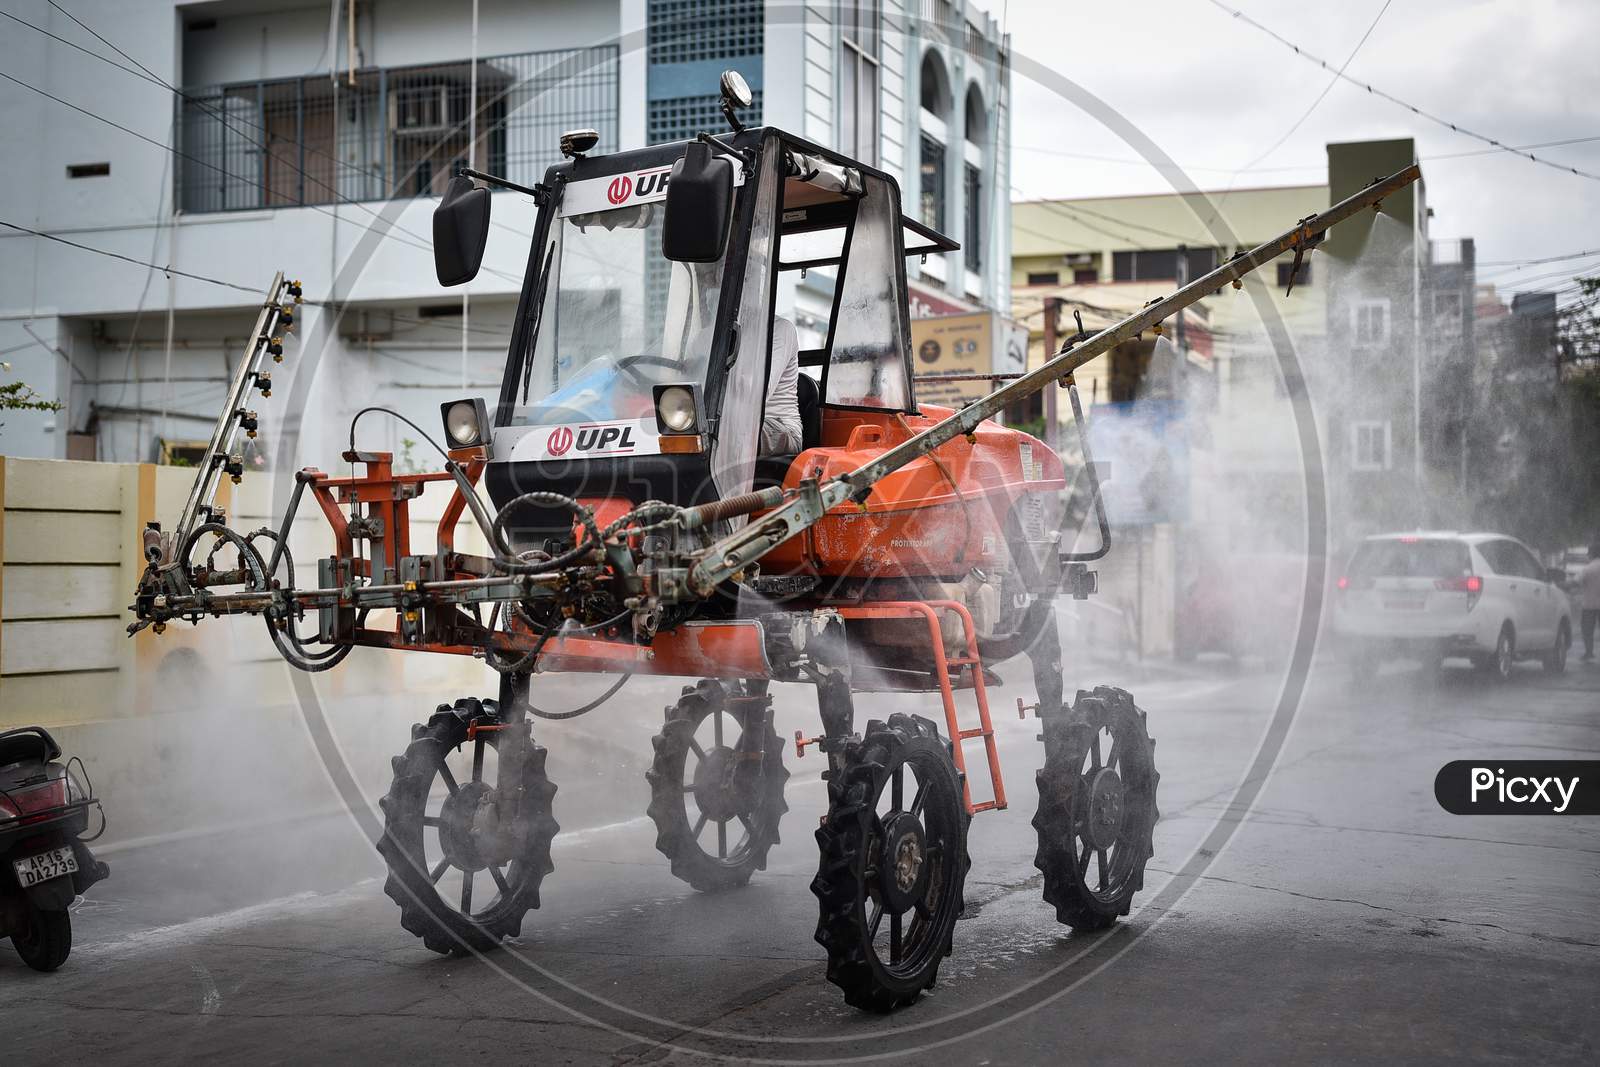 A Corporation Vehicle Sprays Disinfectant As A Precautionary Measure To Prevent The Spread Of Coronavirus, At A Covid-19 Contaminated Zone During The Nationwide Lockdown Imposed In The Wake Of Coronavirus, In Vijayawada.